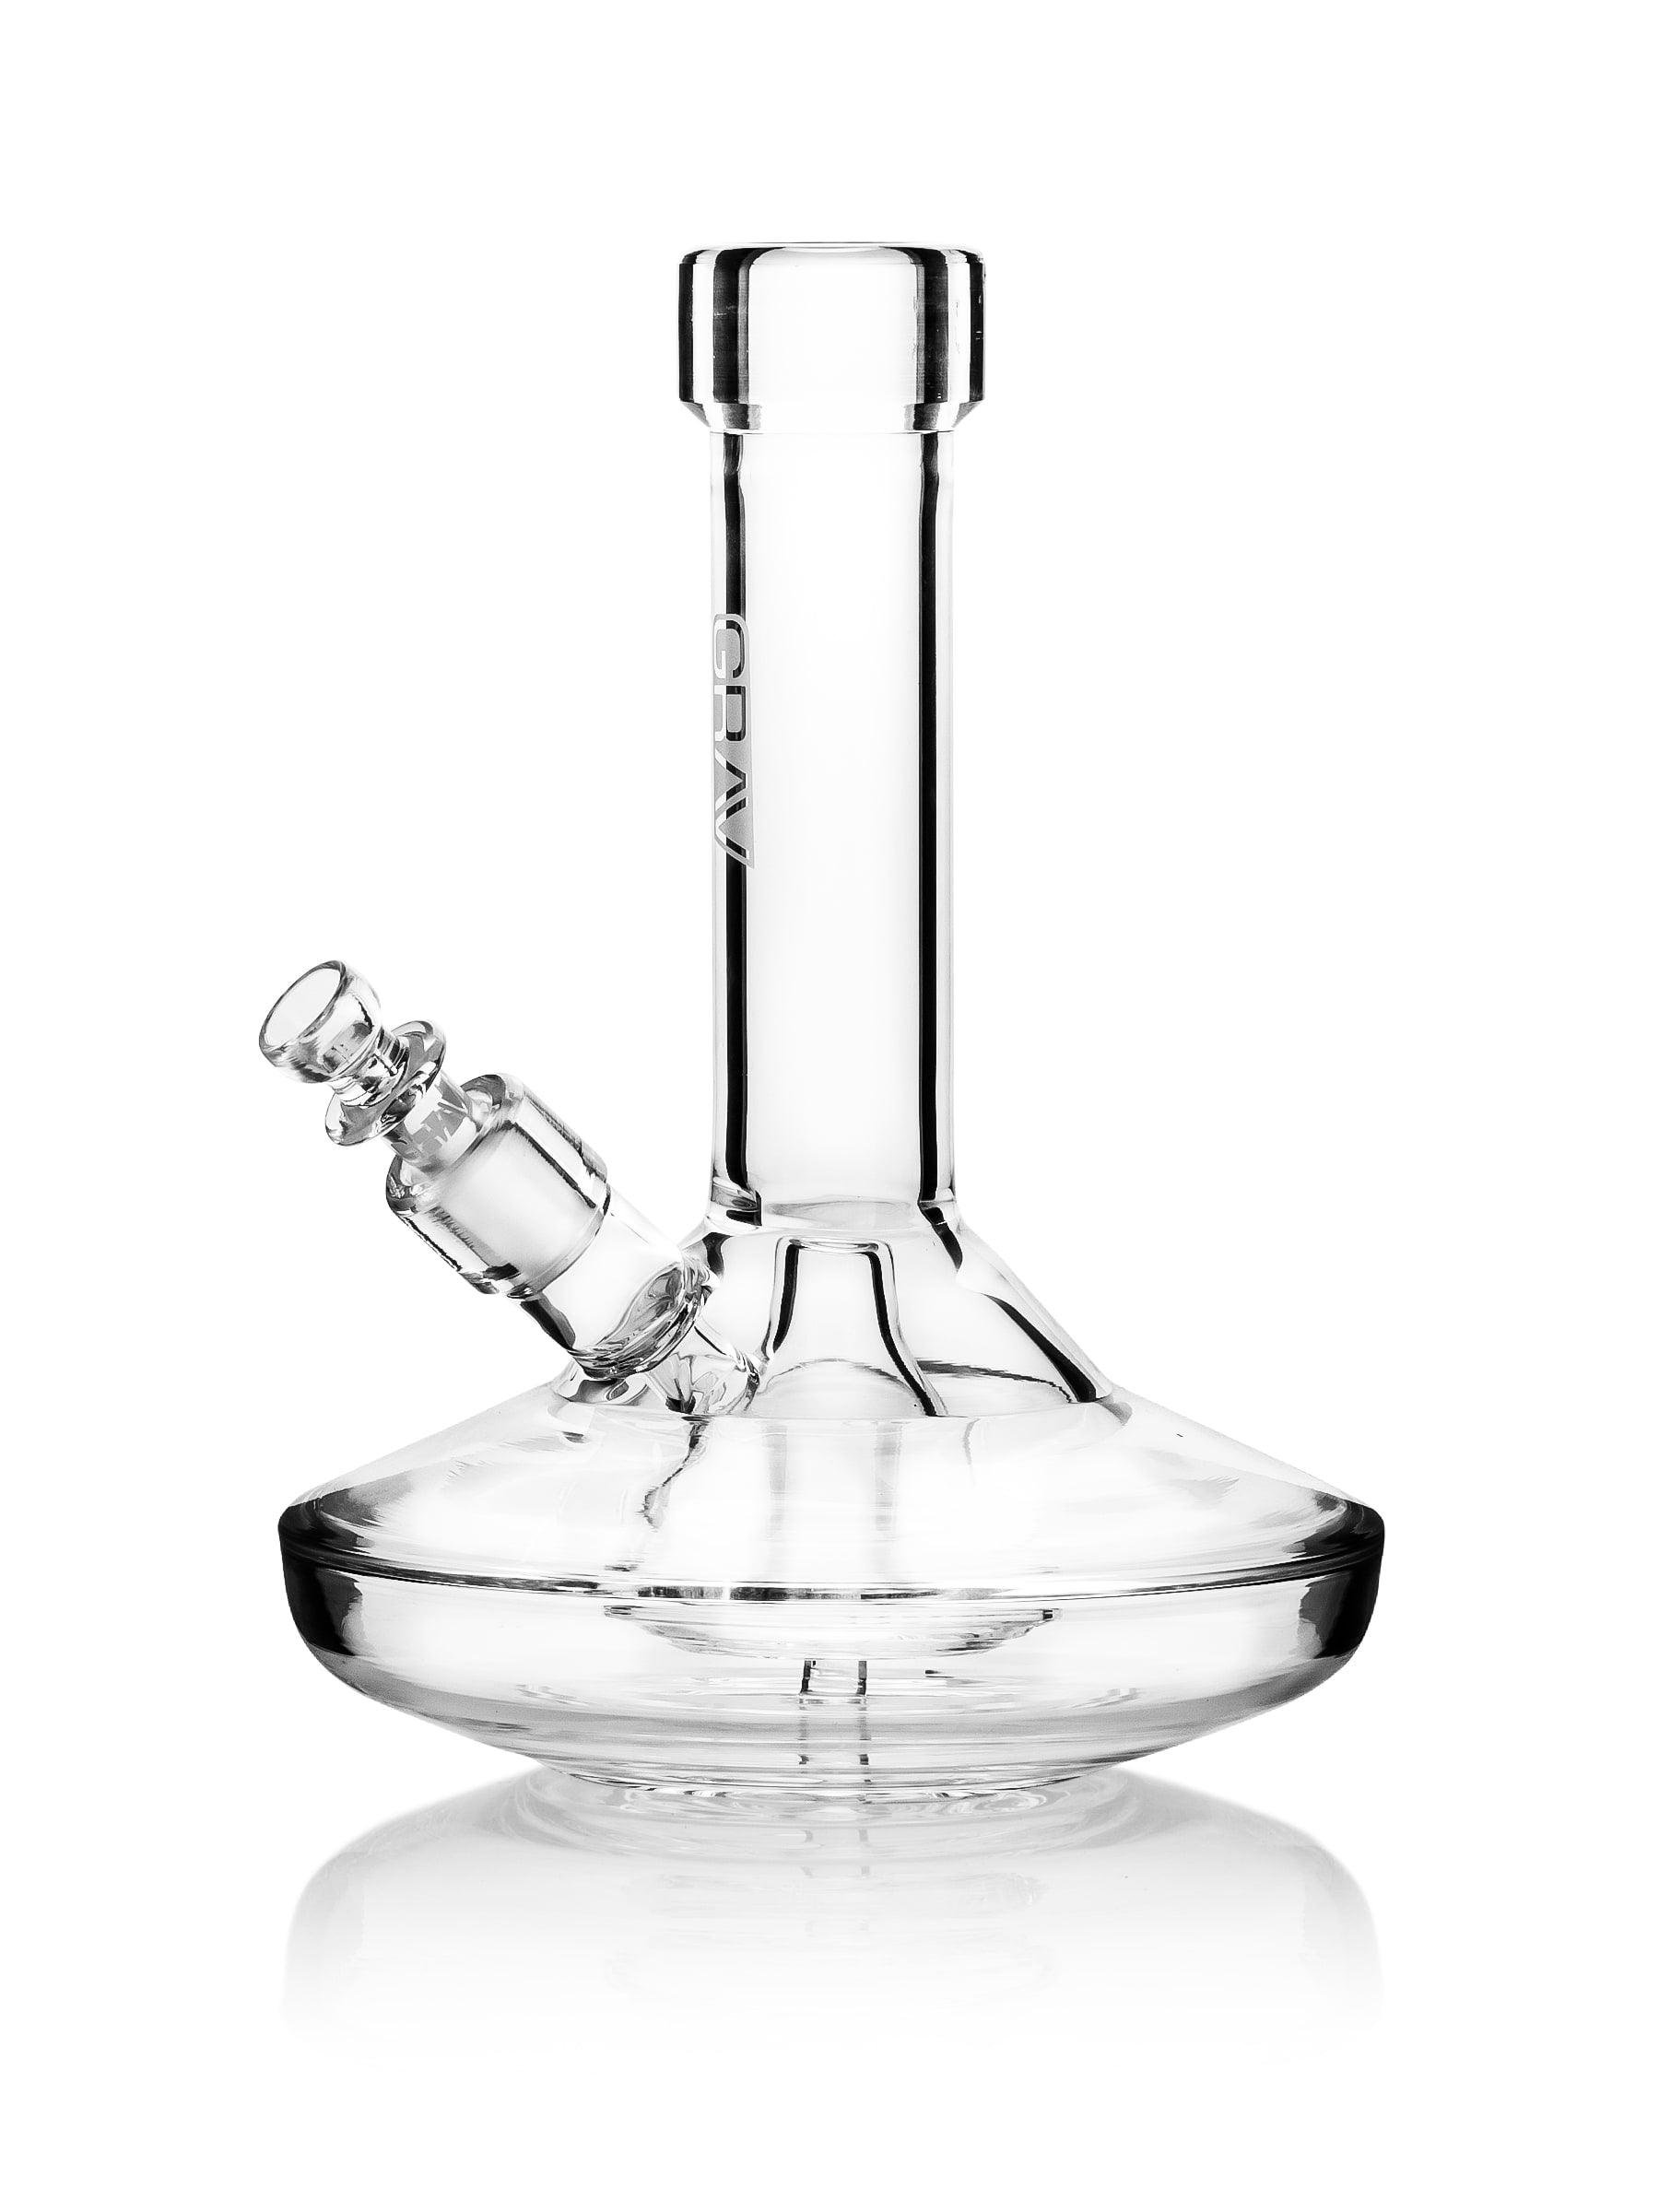 Weed Bubbler vs Bong: Which Is Right For You? – Honest